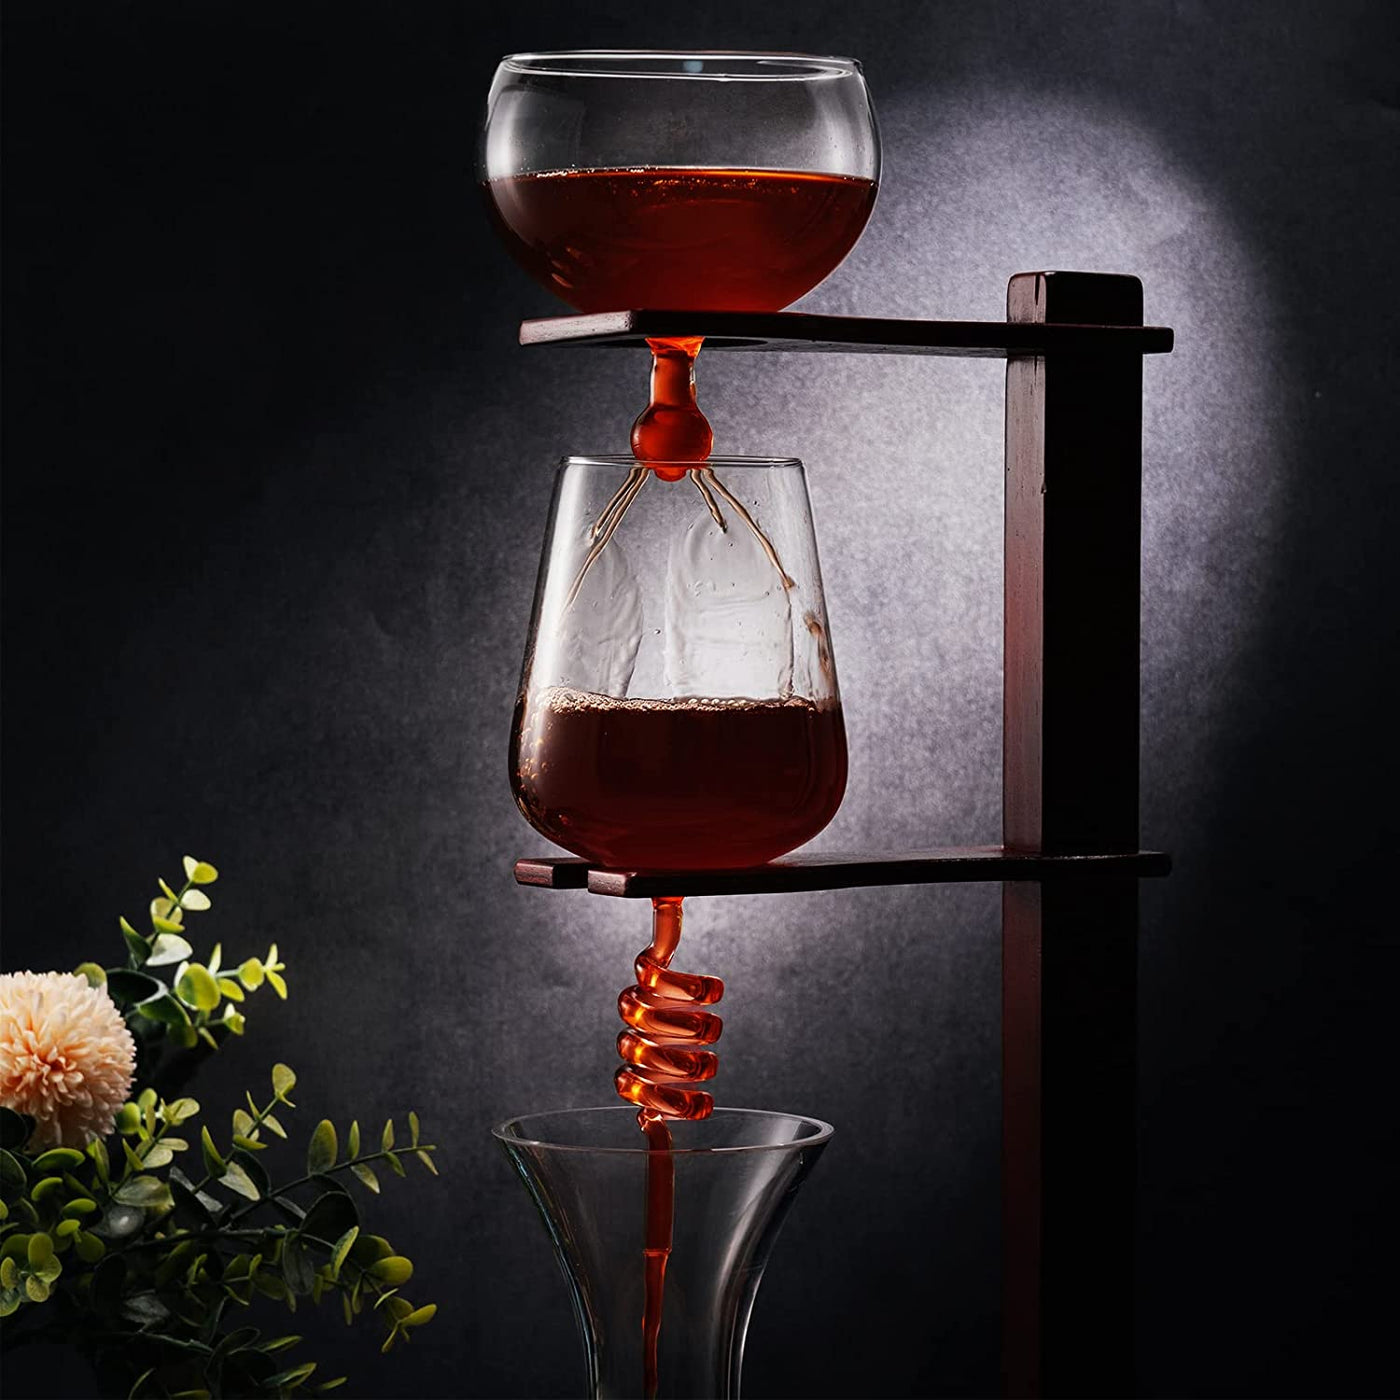 Wine Tower Decanting & Aerator Set by Liquor Lux - Unique Wine Decanter - 3 Aerating Parts - Upper, Middle & Lower Aerators - Whisky & Wines Carafe, Proven to Enhance & Improves Flavor & Aromas